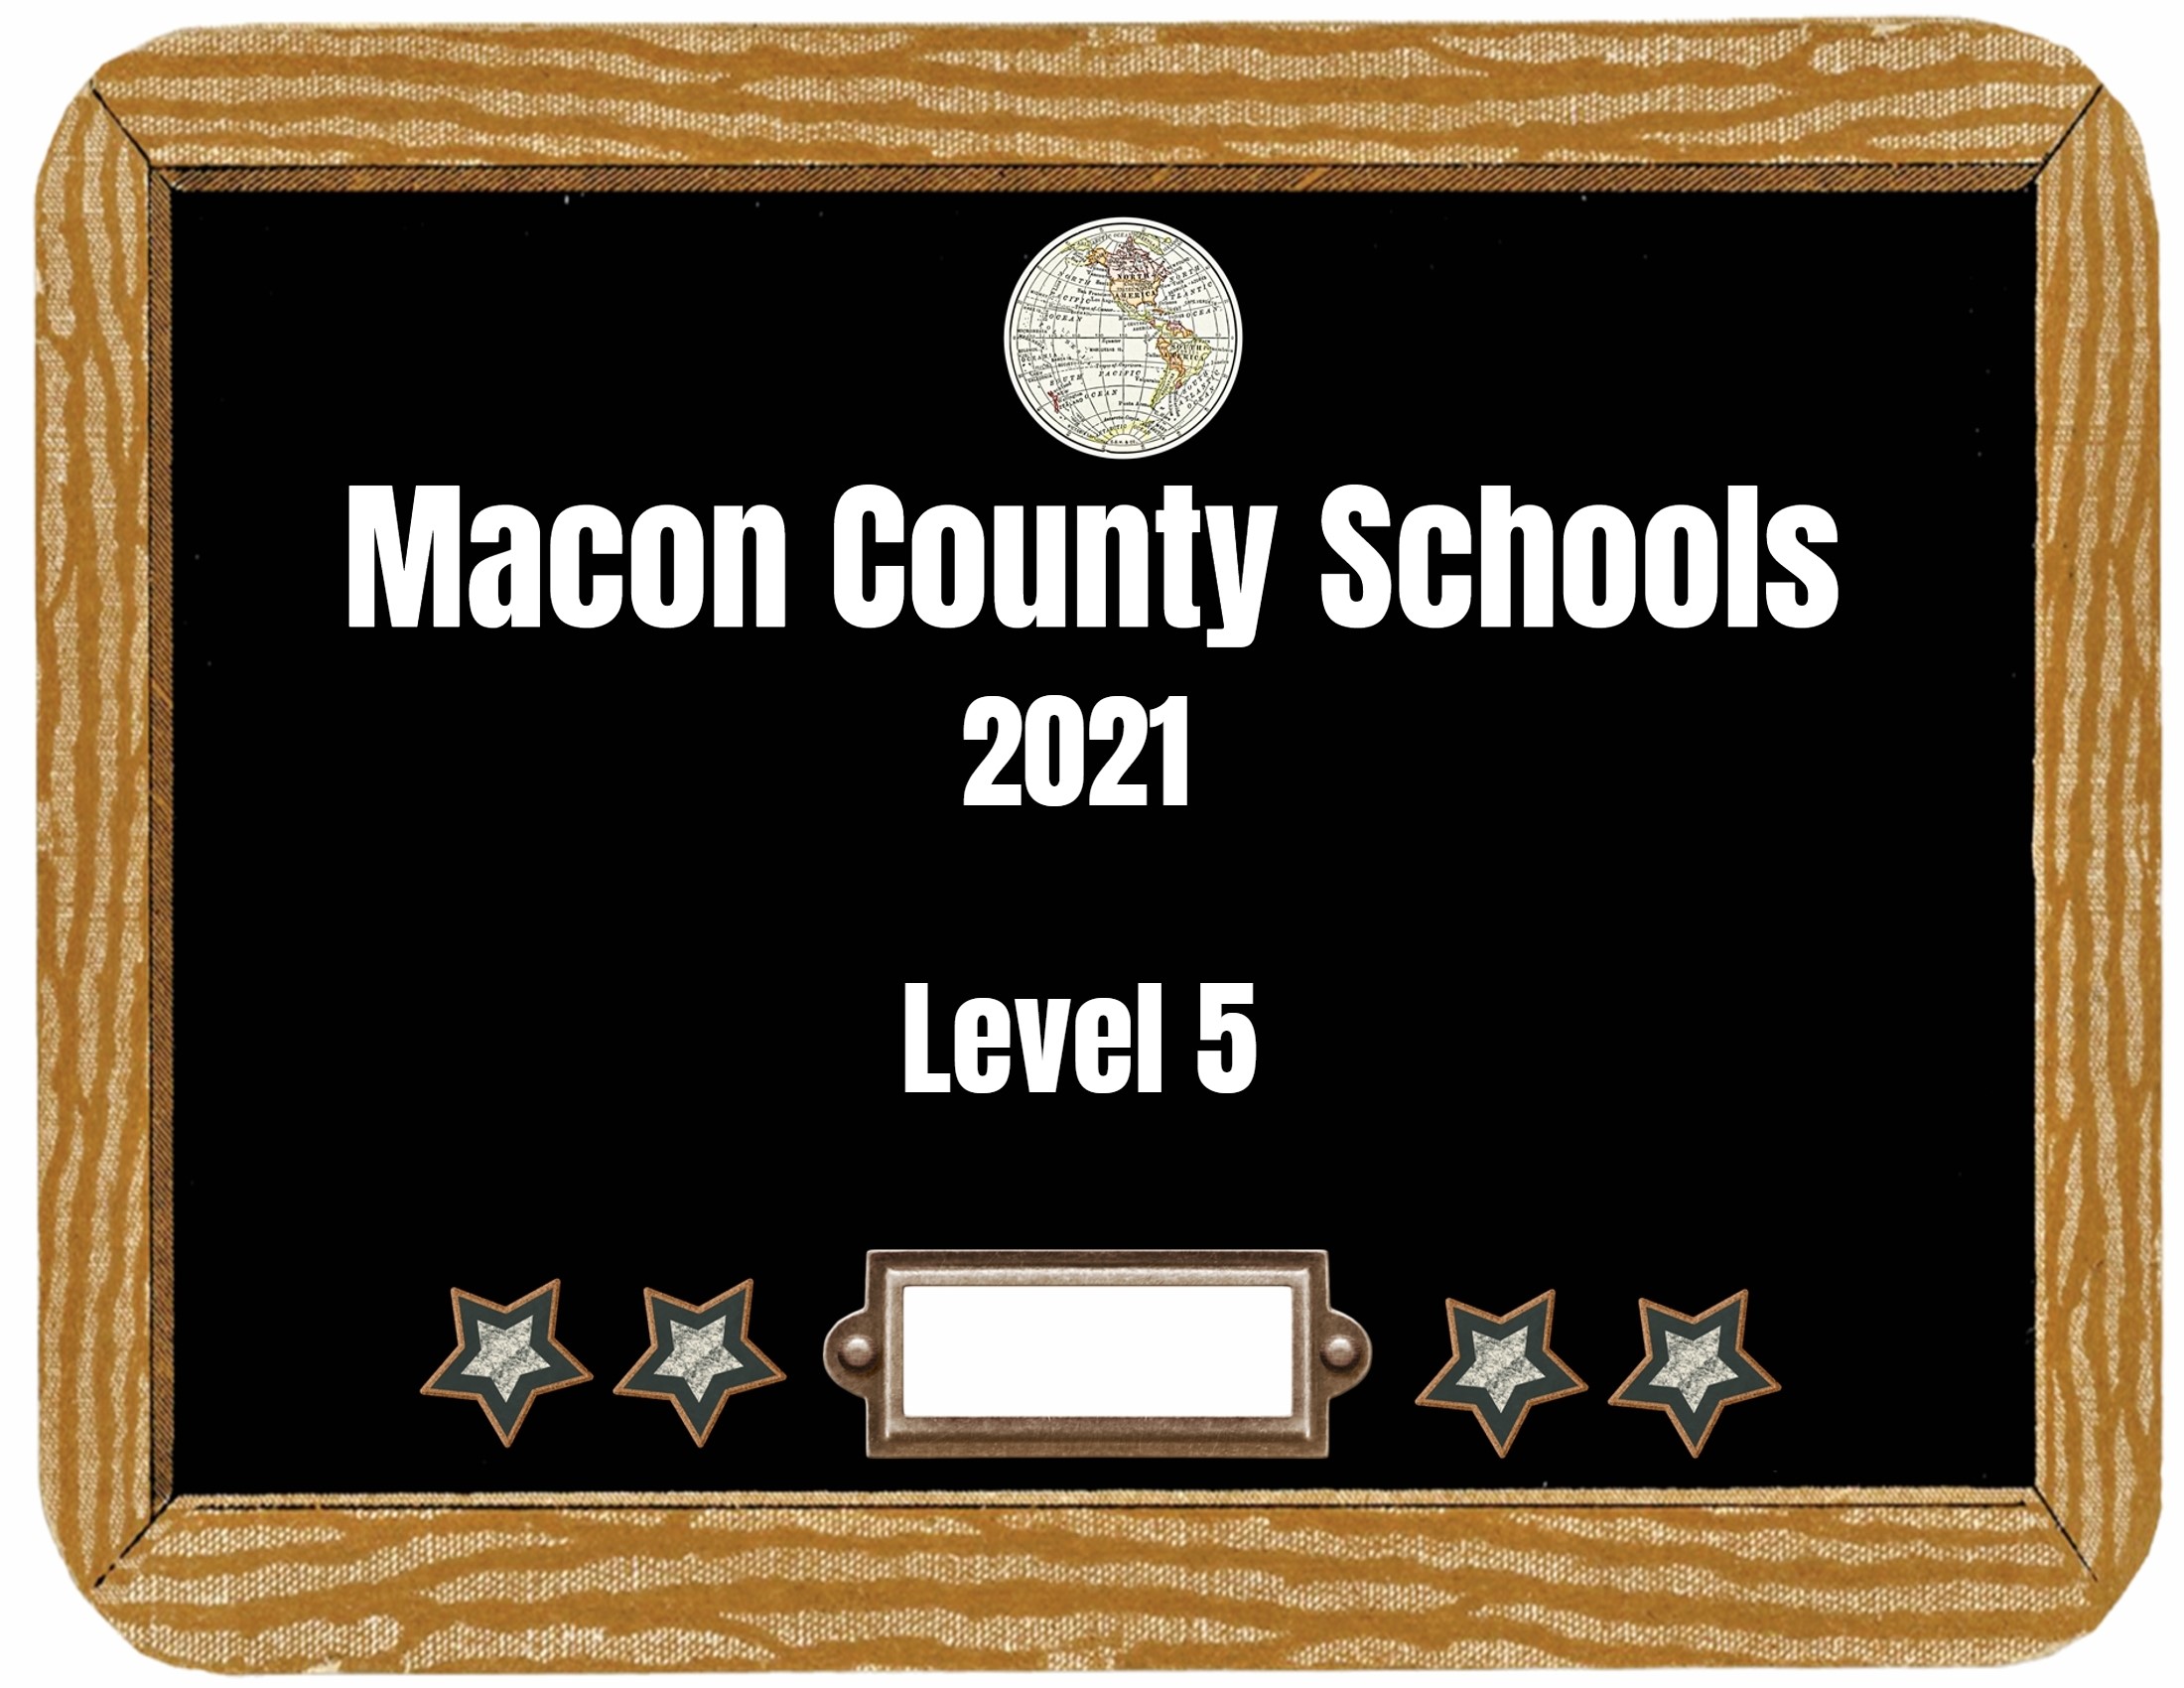 About MCS Macon County Schools